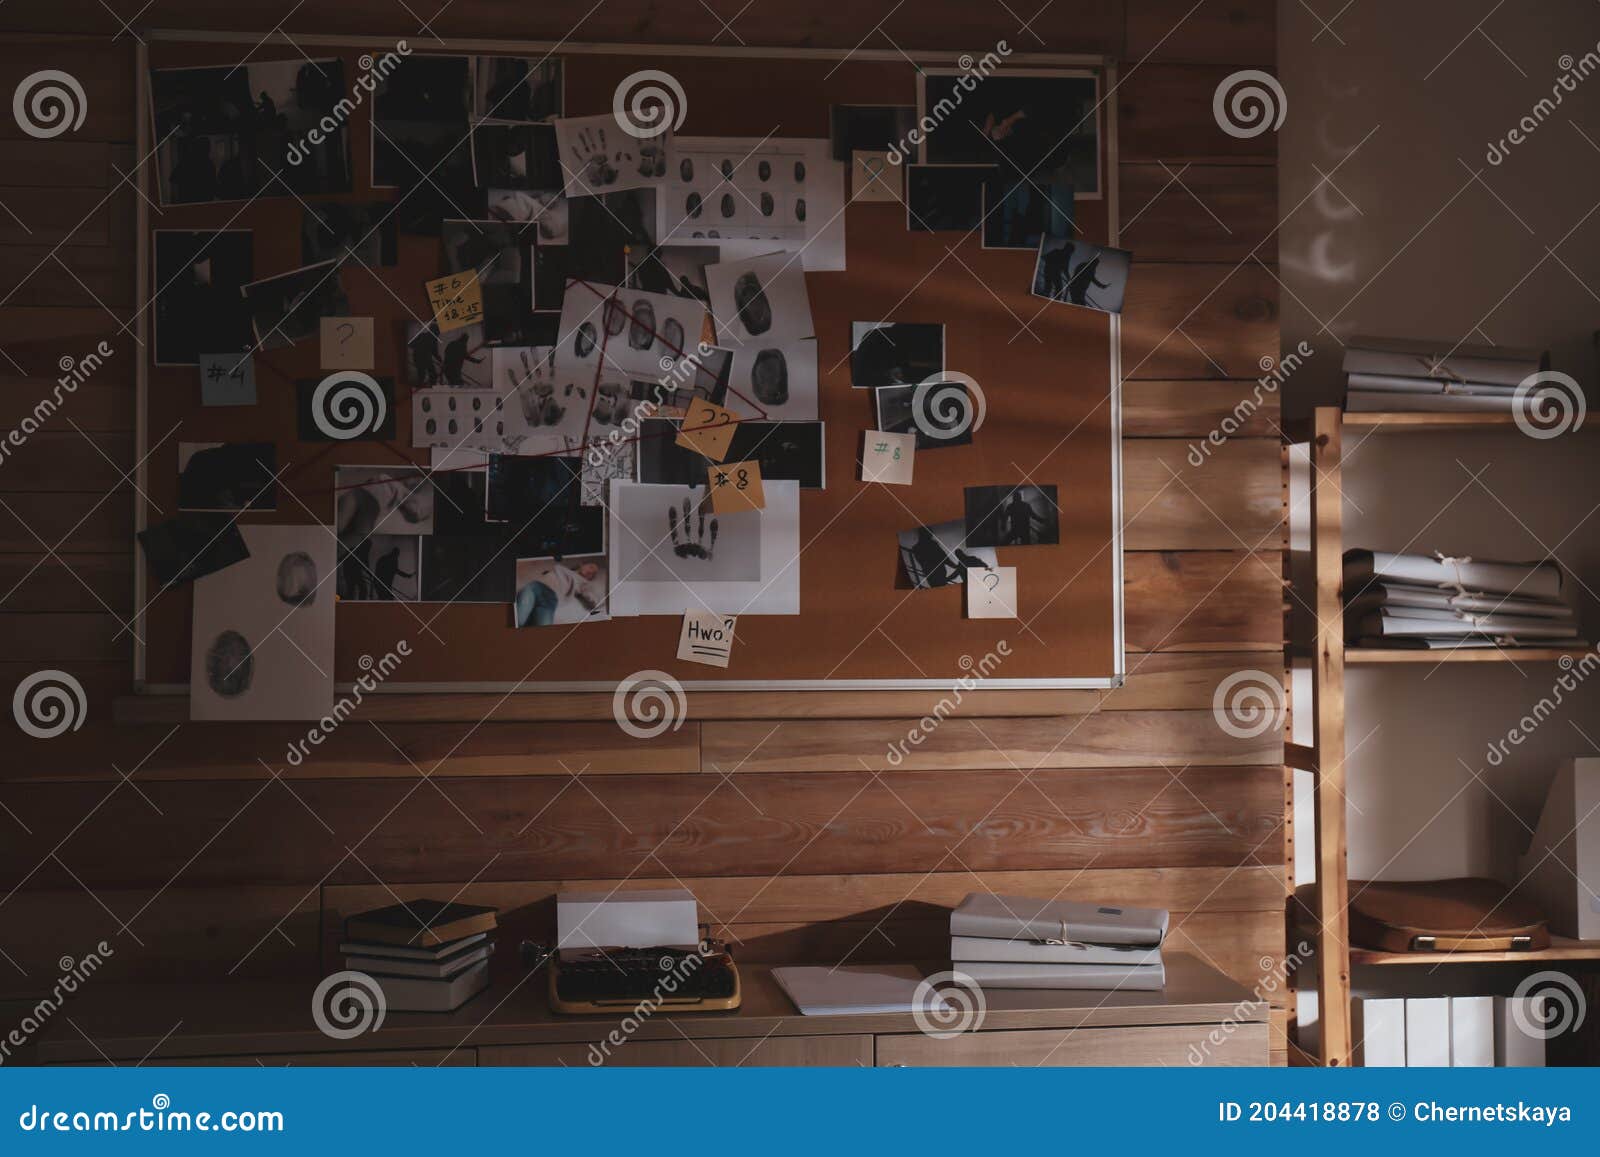 Detective Office Interior with Evidence Board on Wall Stock Photo ...